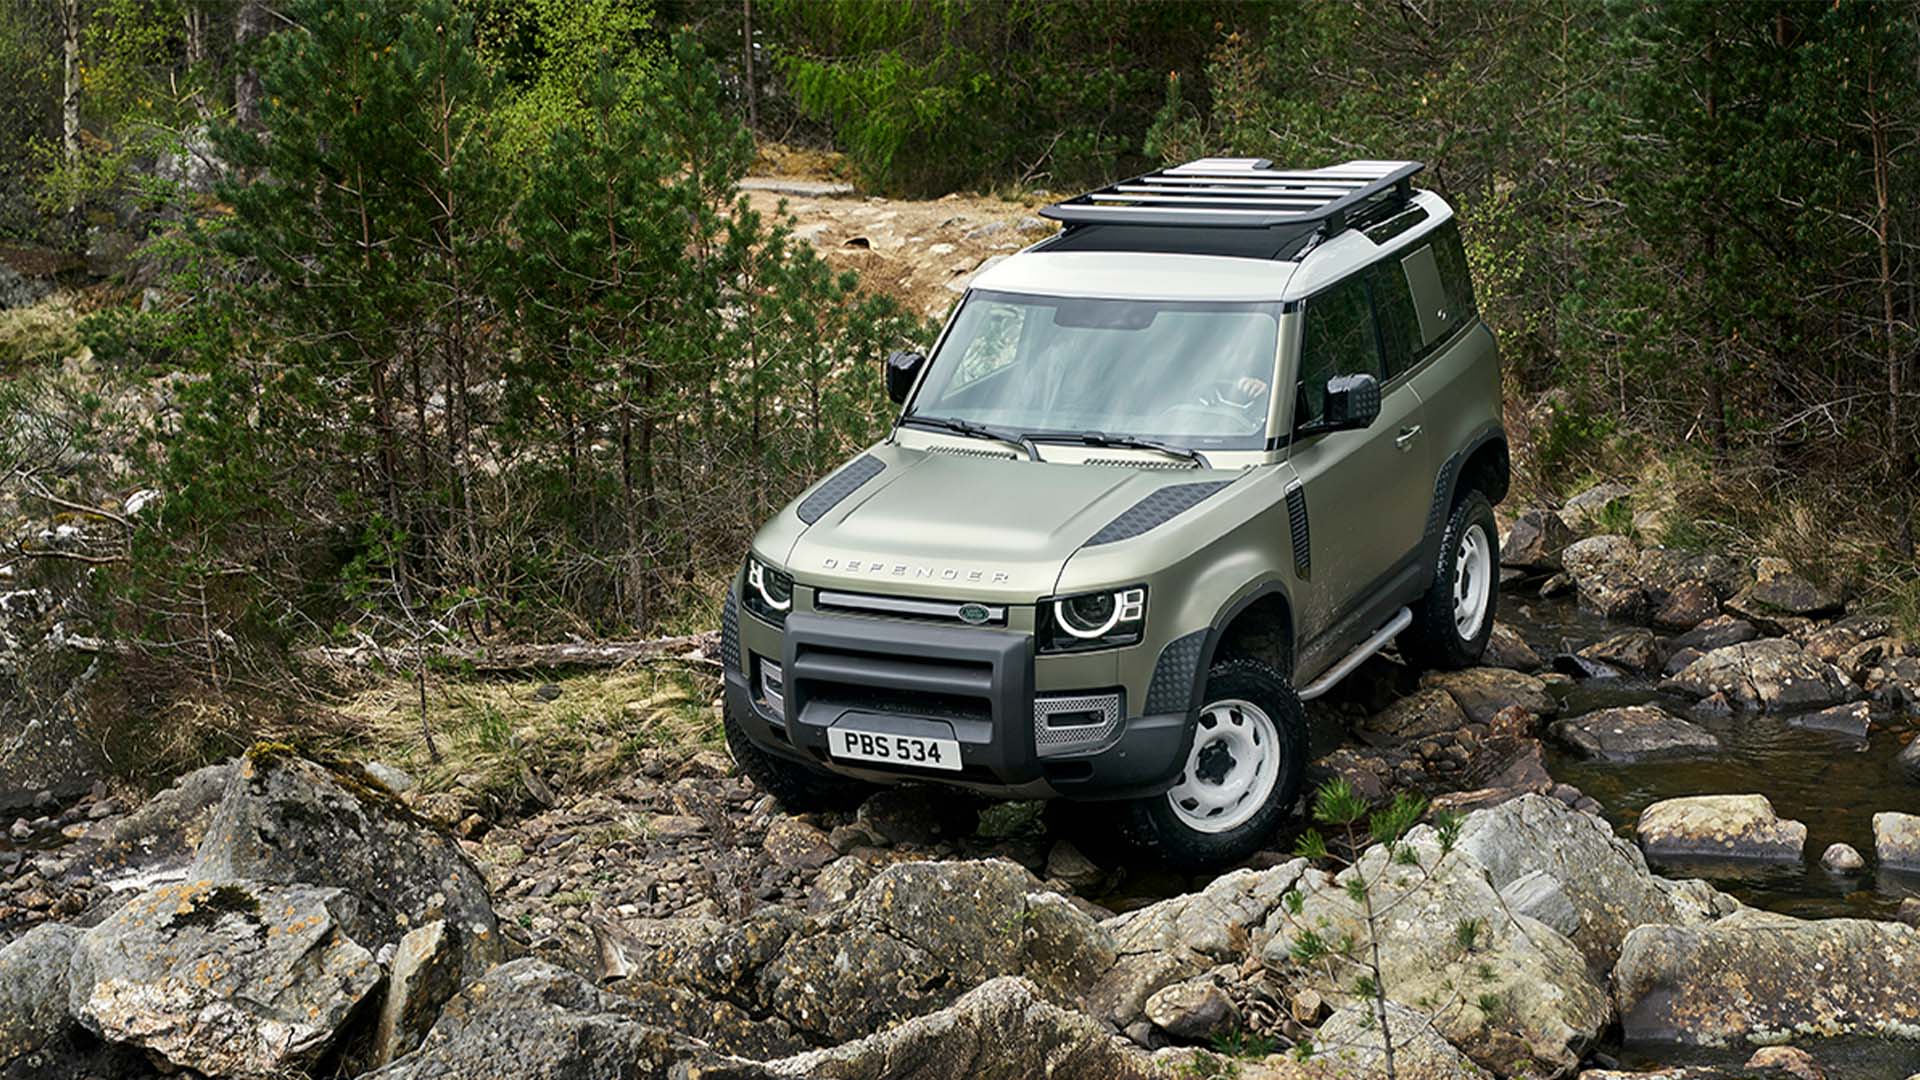 New Land Rover Defender launched in India: Price, availability